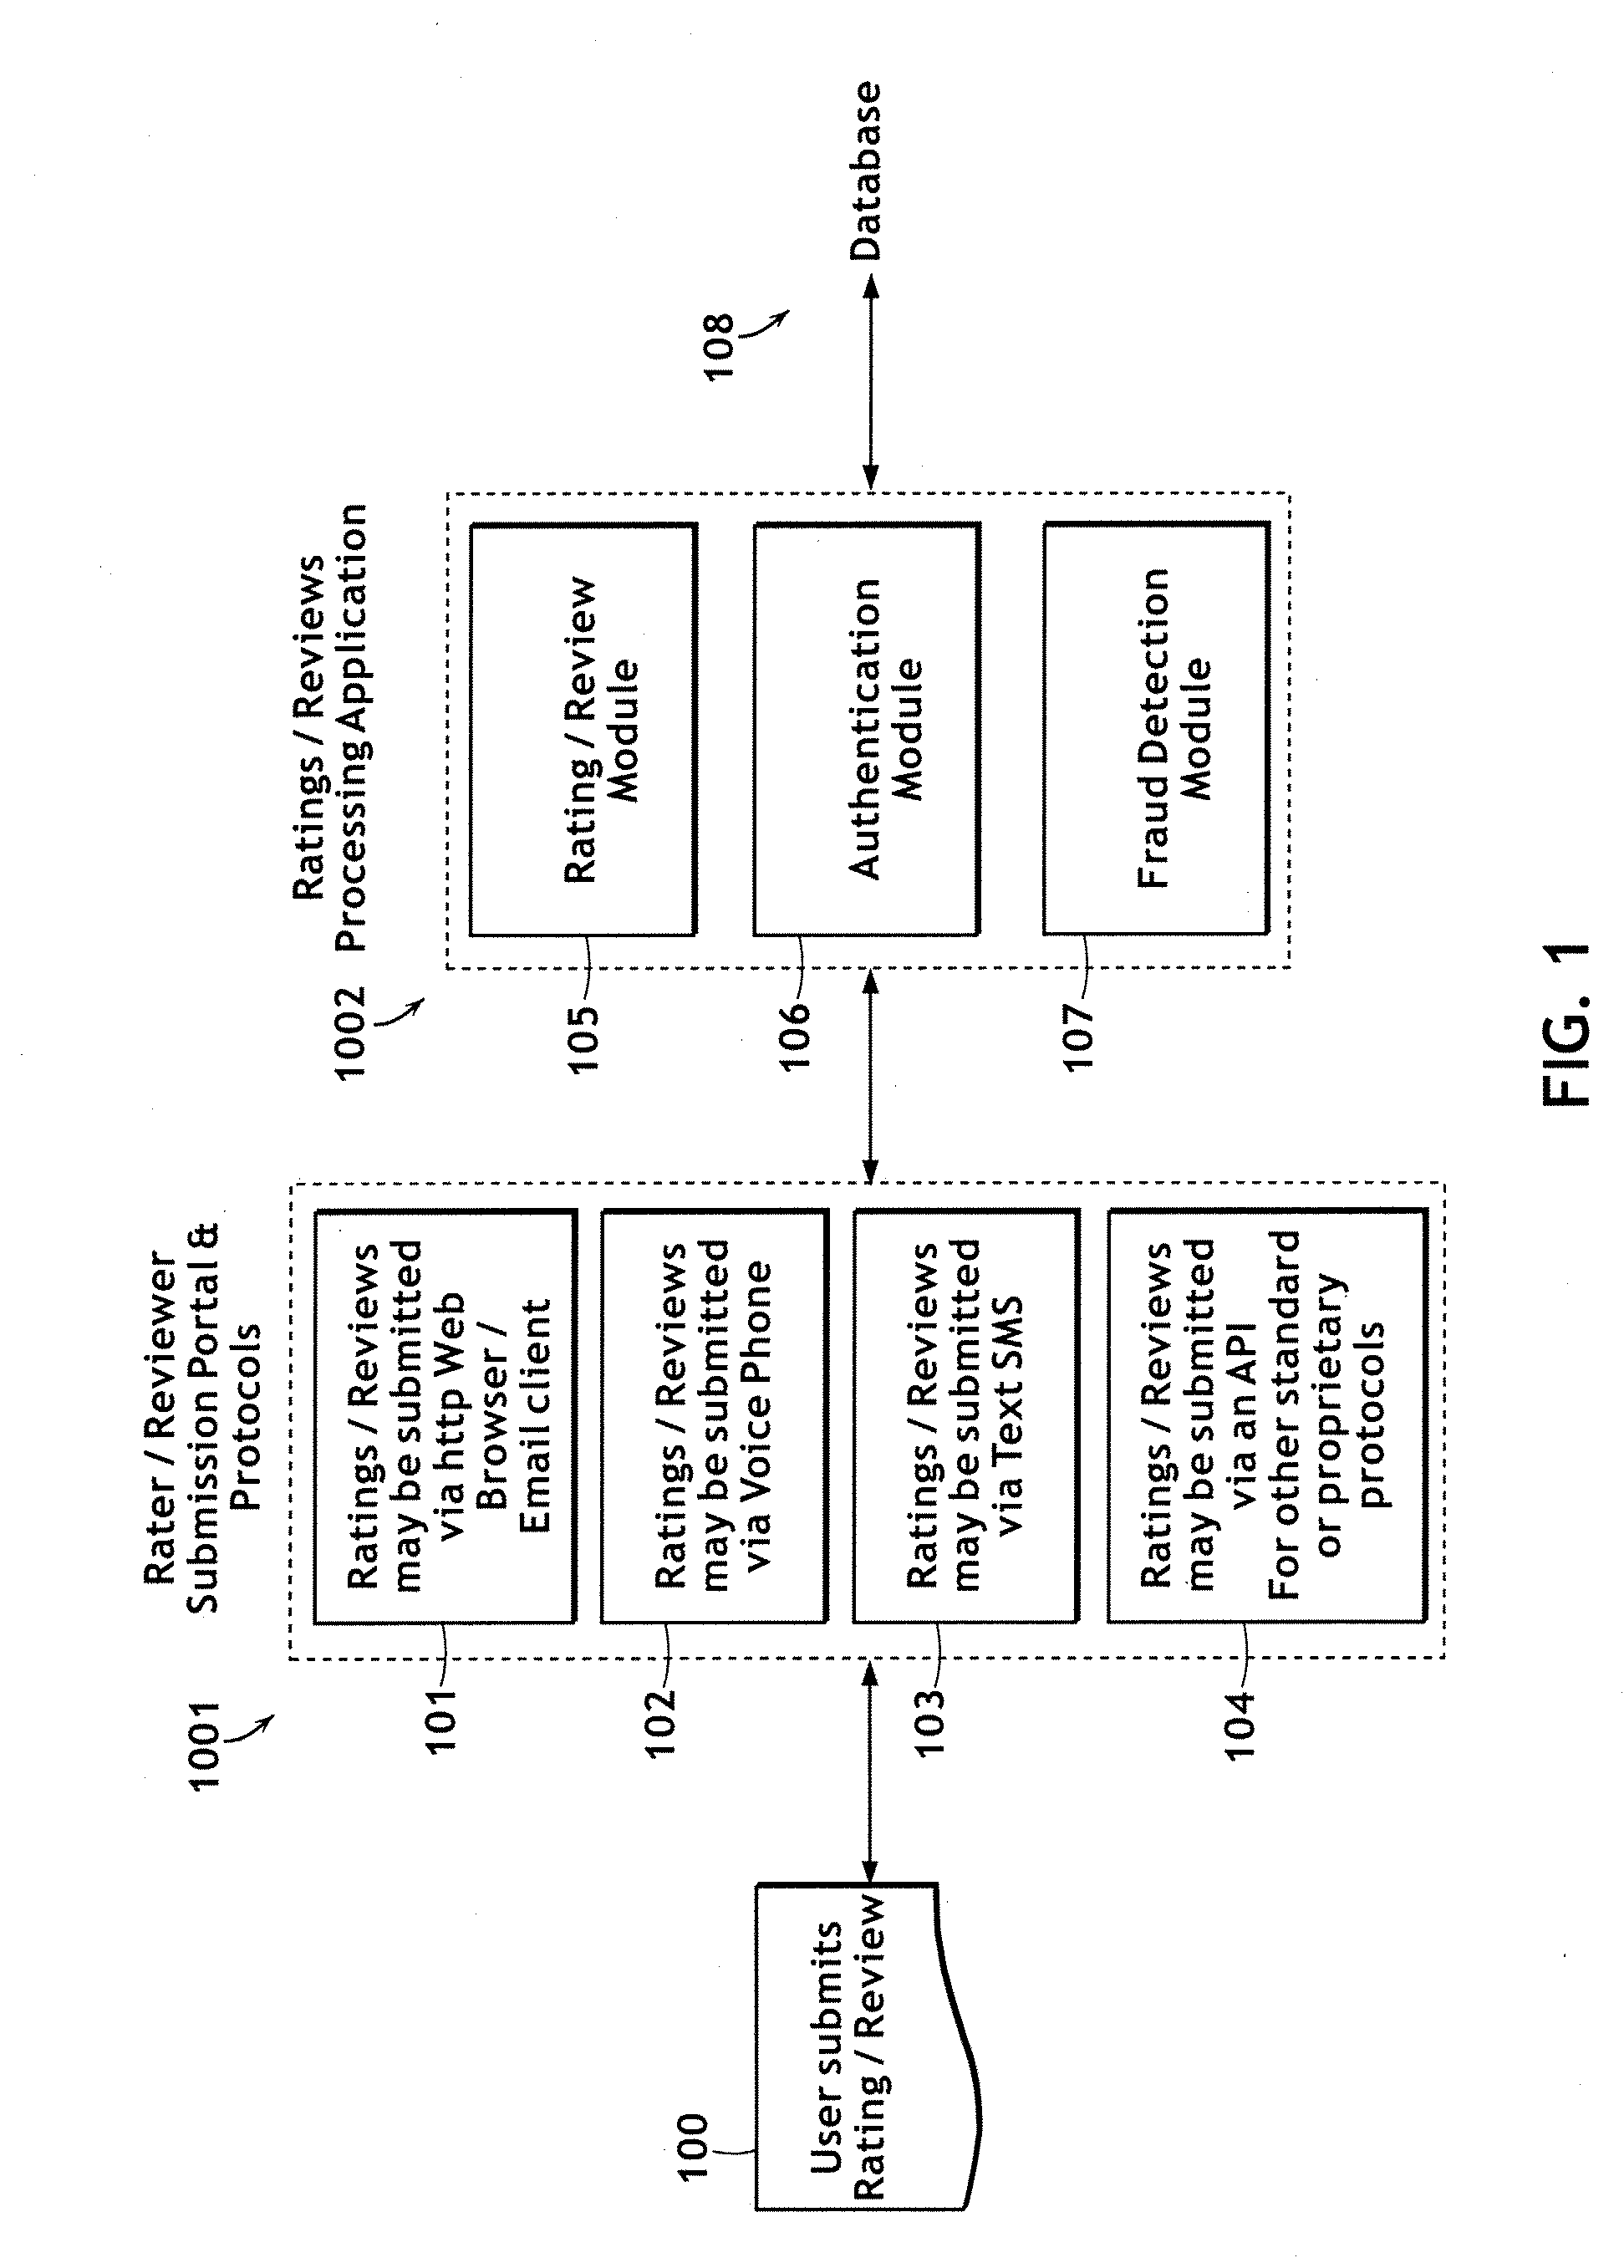 System and method for collecting bonafide reviews of ratable objects